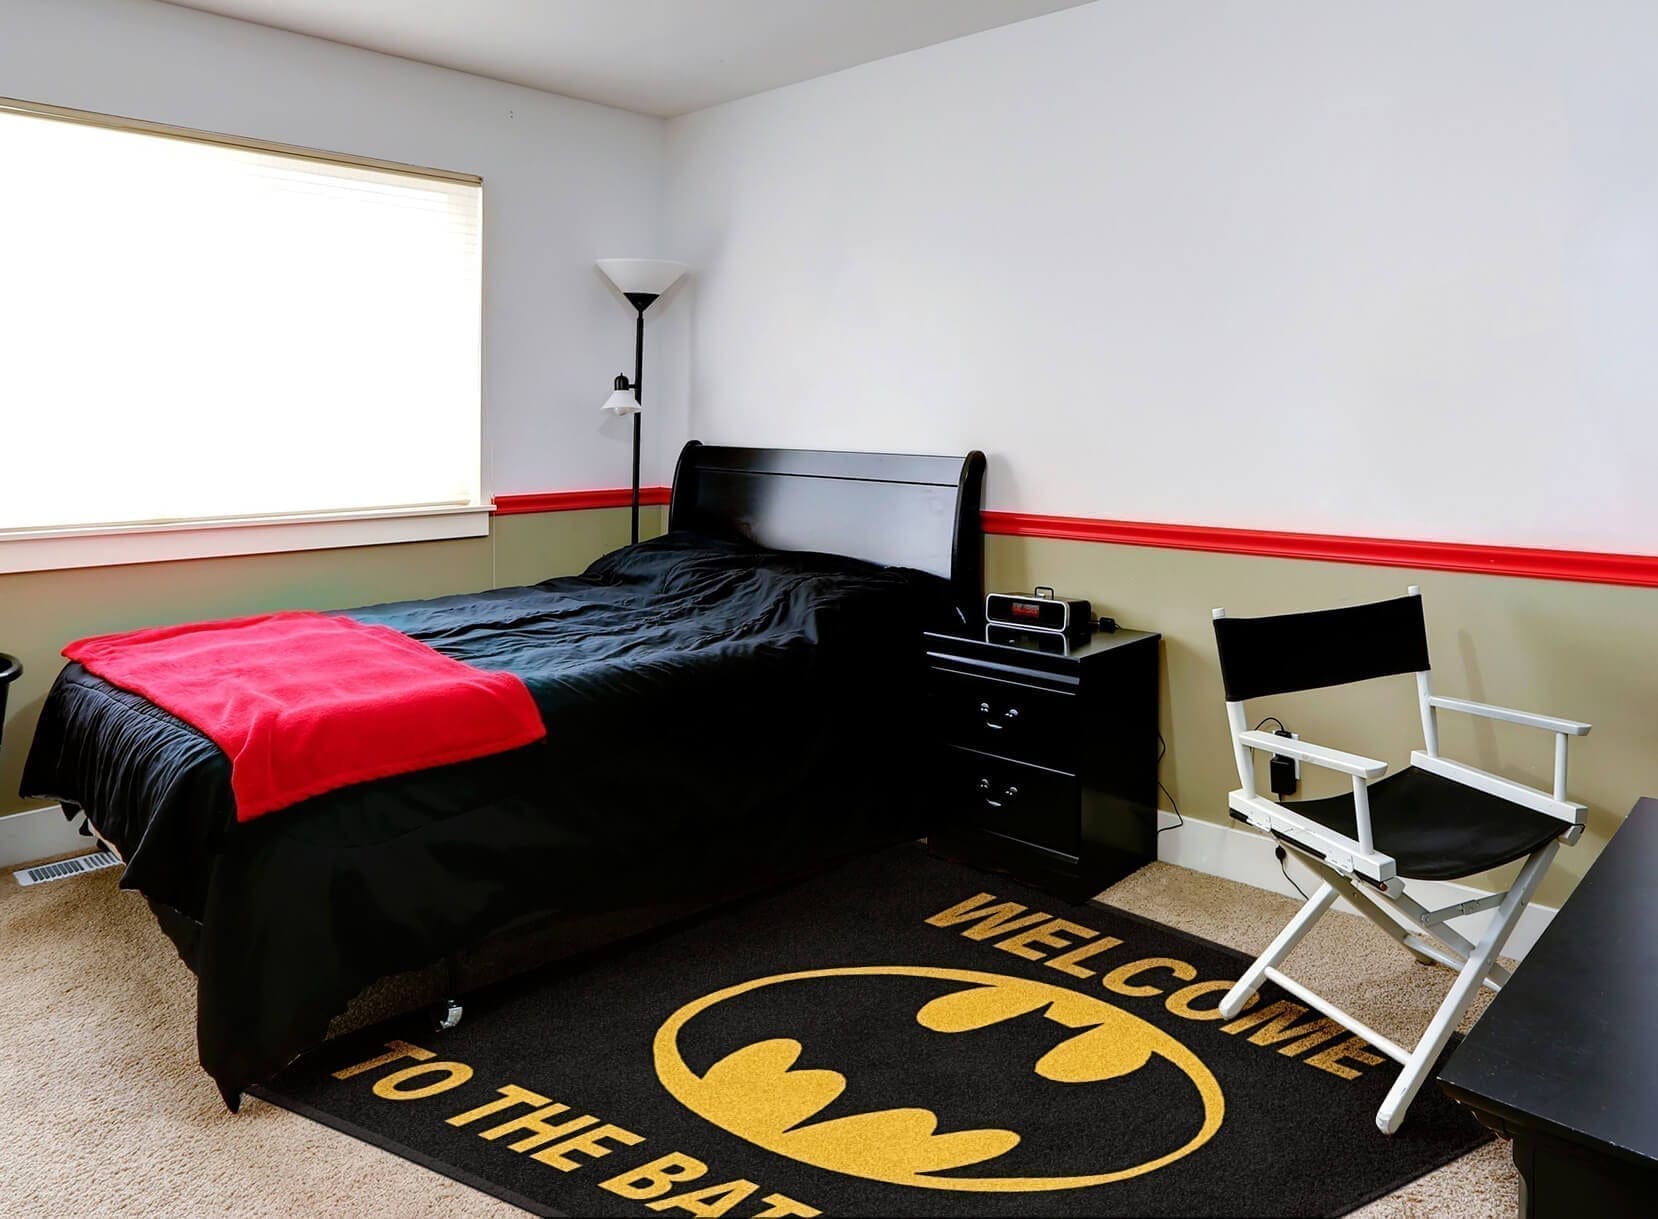 Welcome to the Batcave rug in a child's bedroom